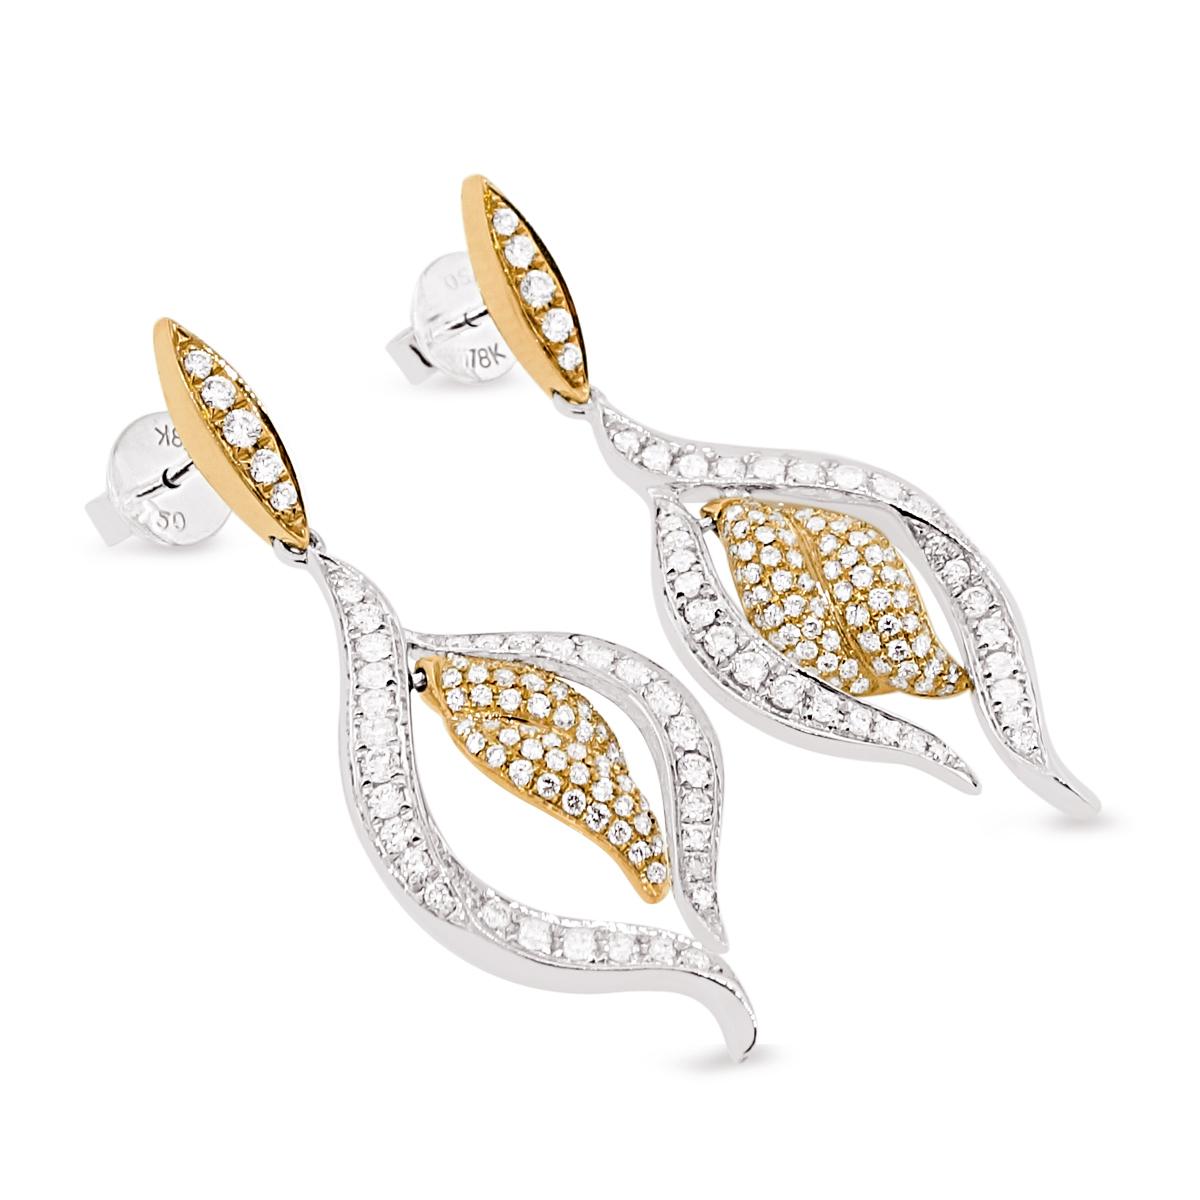 Diamond Earrings containing 210 round brilliant cut diamonds of about 1.48 carats with a clarity of VS and color G. All stones are set in 18k 2 tone gold. The total weight of the earrings is approximately 8.38 grams.

Measurements L x W: 1.75 x0.65